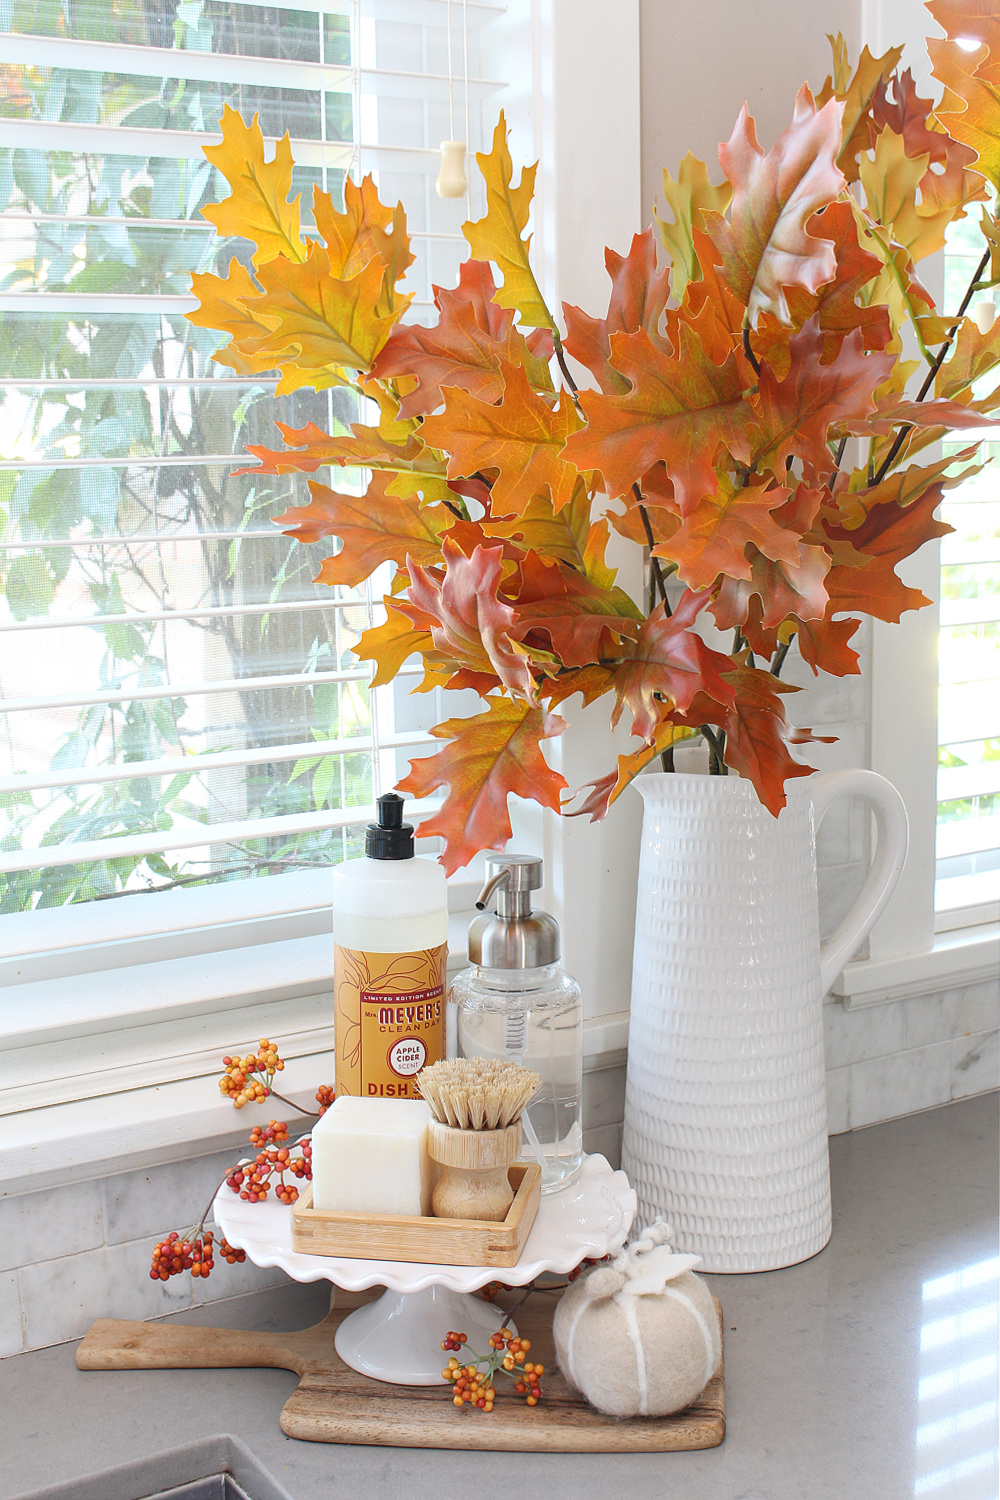 Fall kitchen sink display with cake stand, dish soaps, and oak leaves.